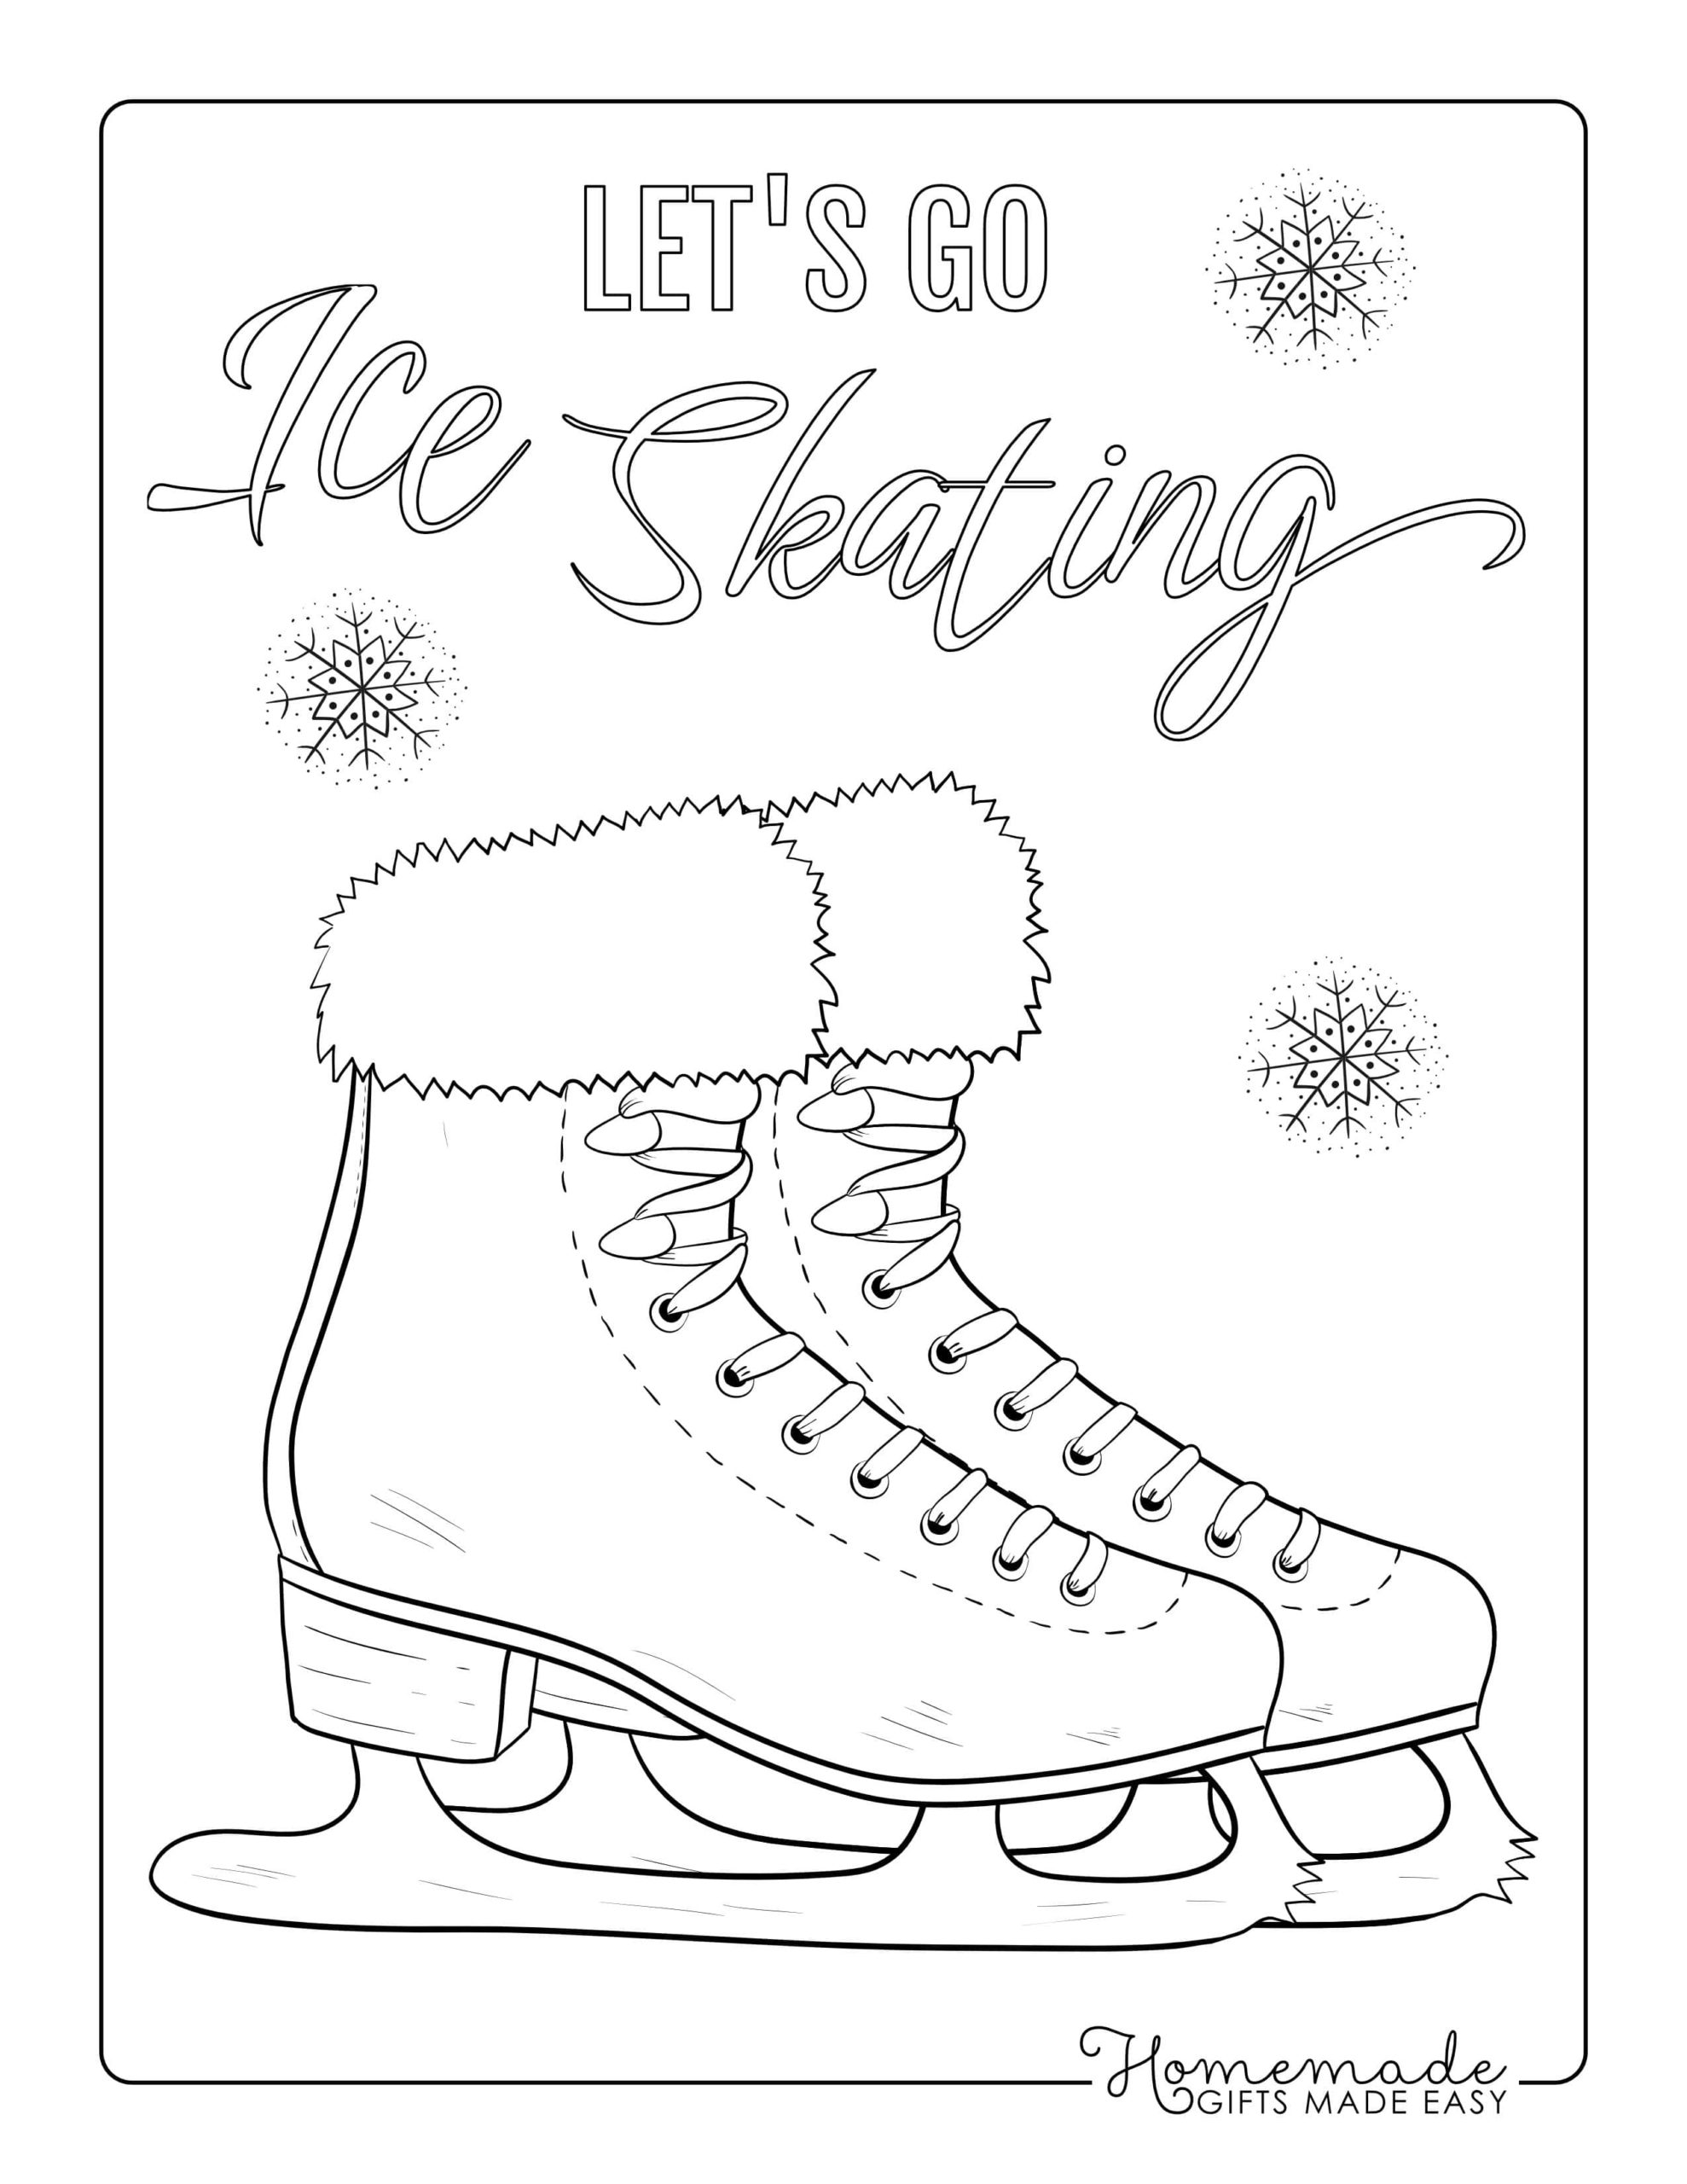 https://www.happierhuman.com/wp-content/uploads/2021/11/ice-skates-coloring-page-scaled.jpg